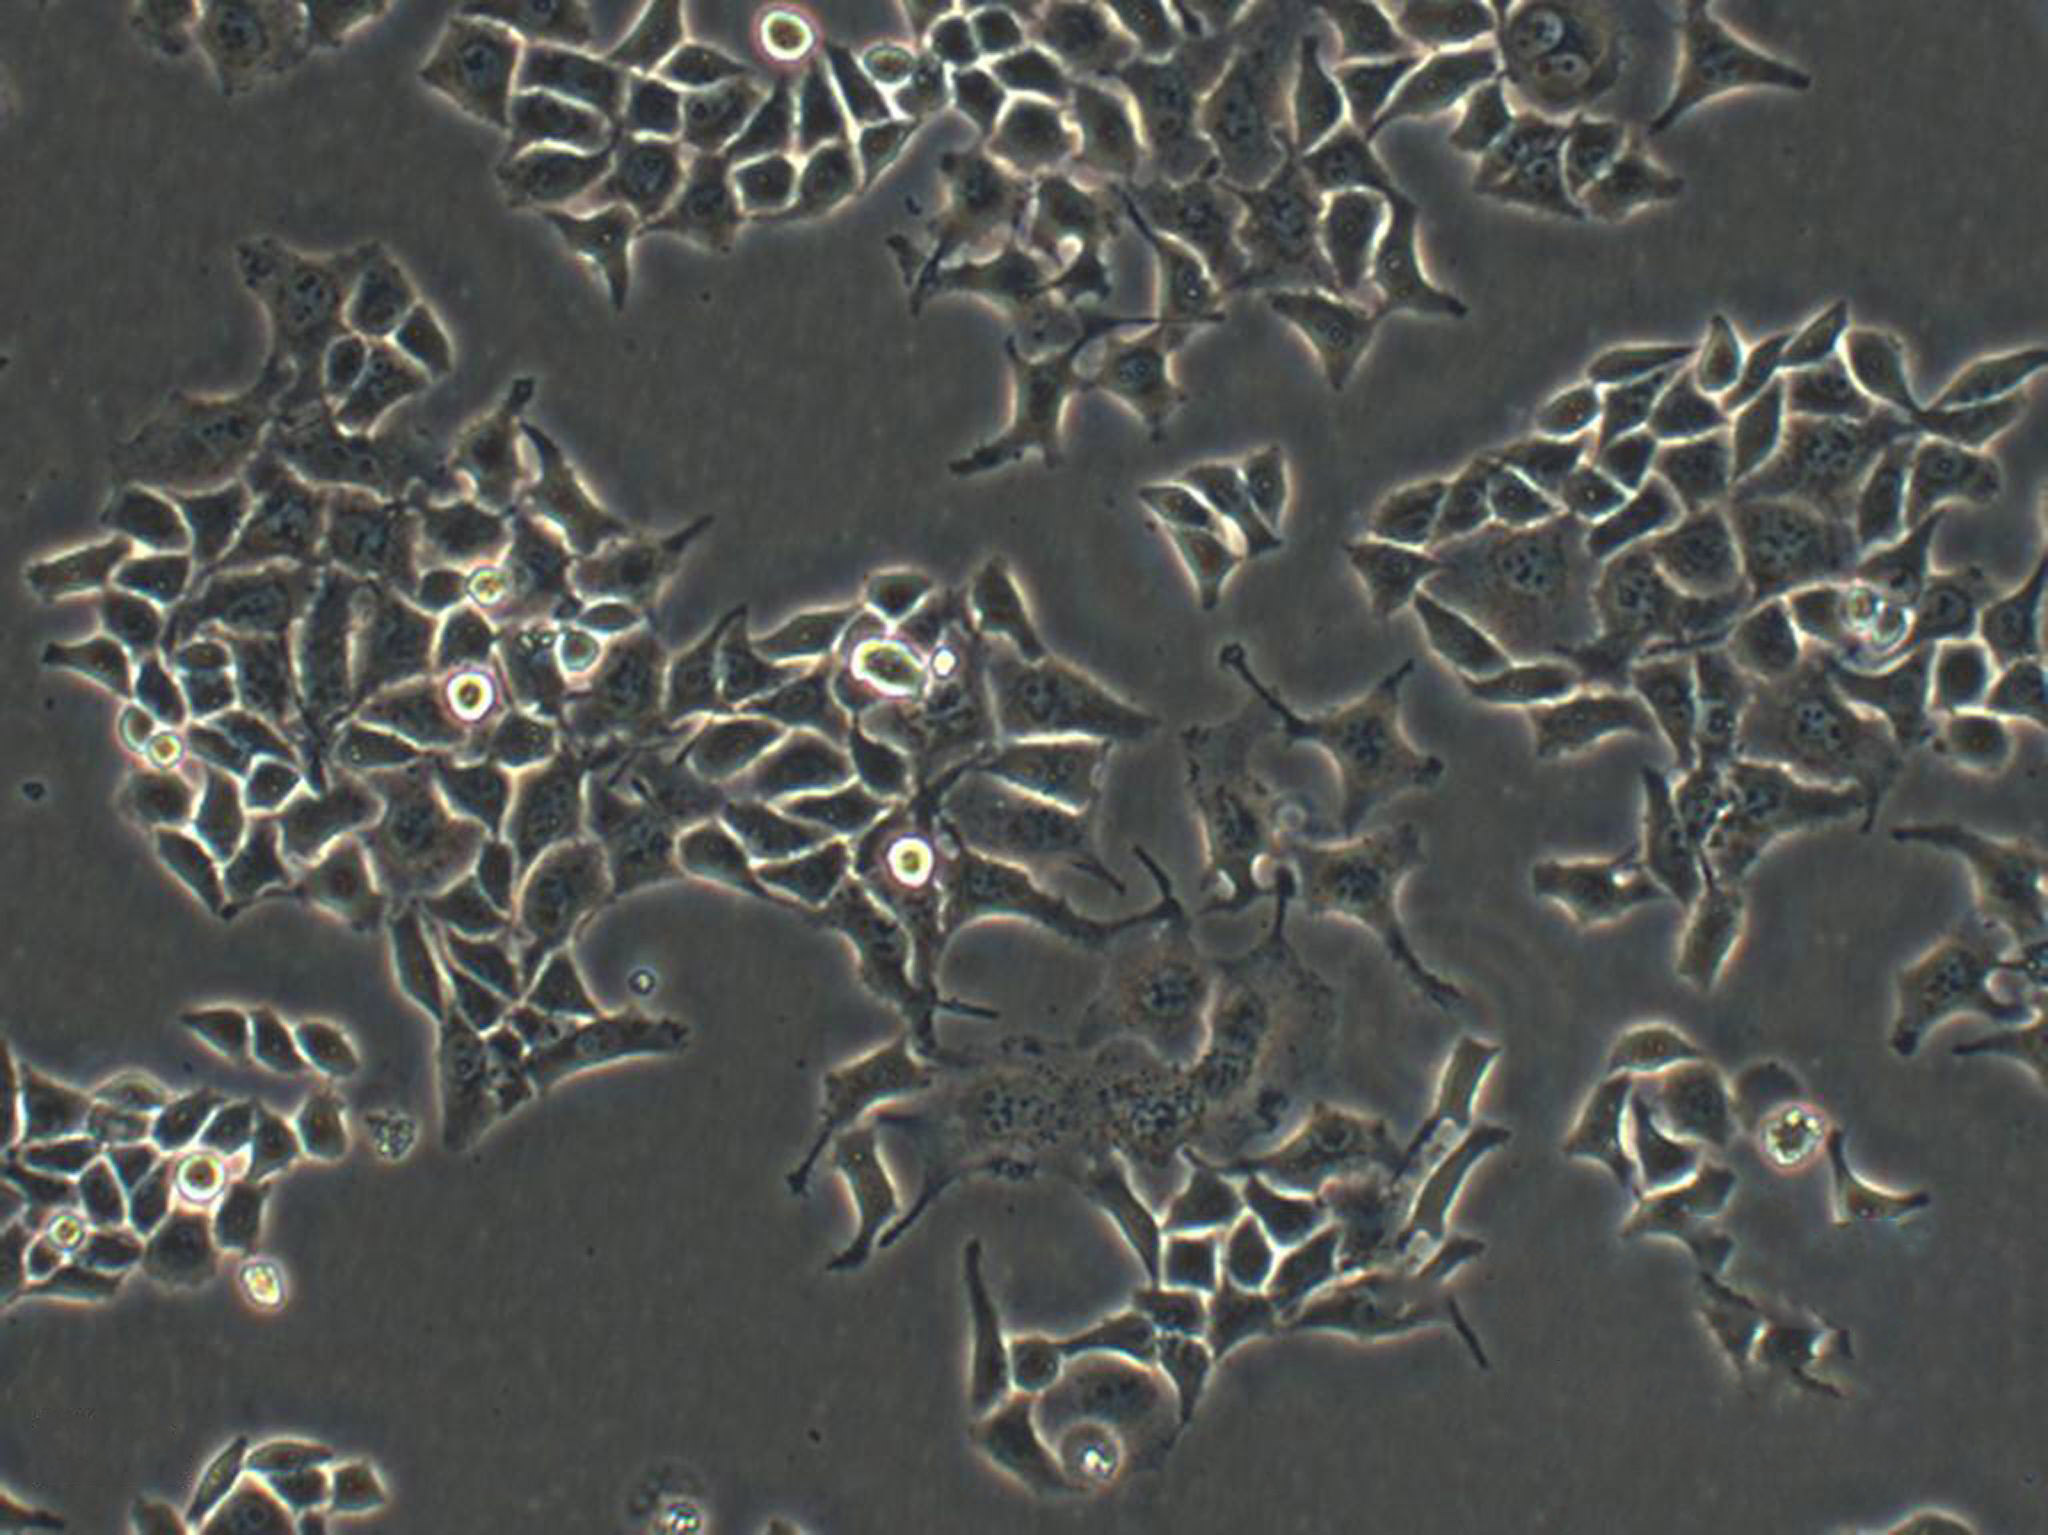 CL-34 epithelioid cells人结肠癌细胞系,CL-34 epithelioid cells